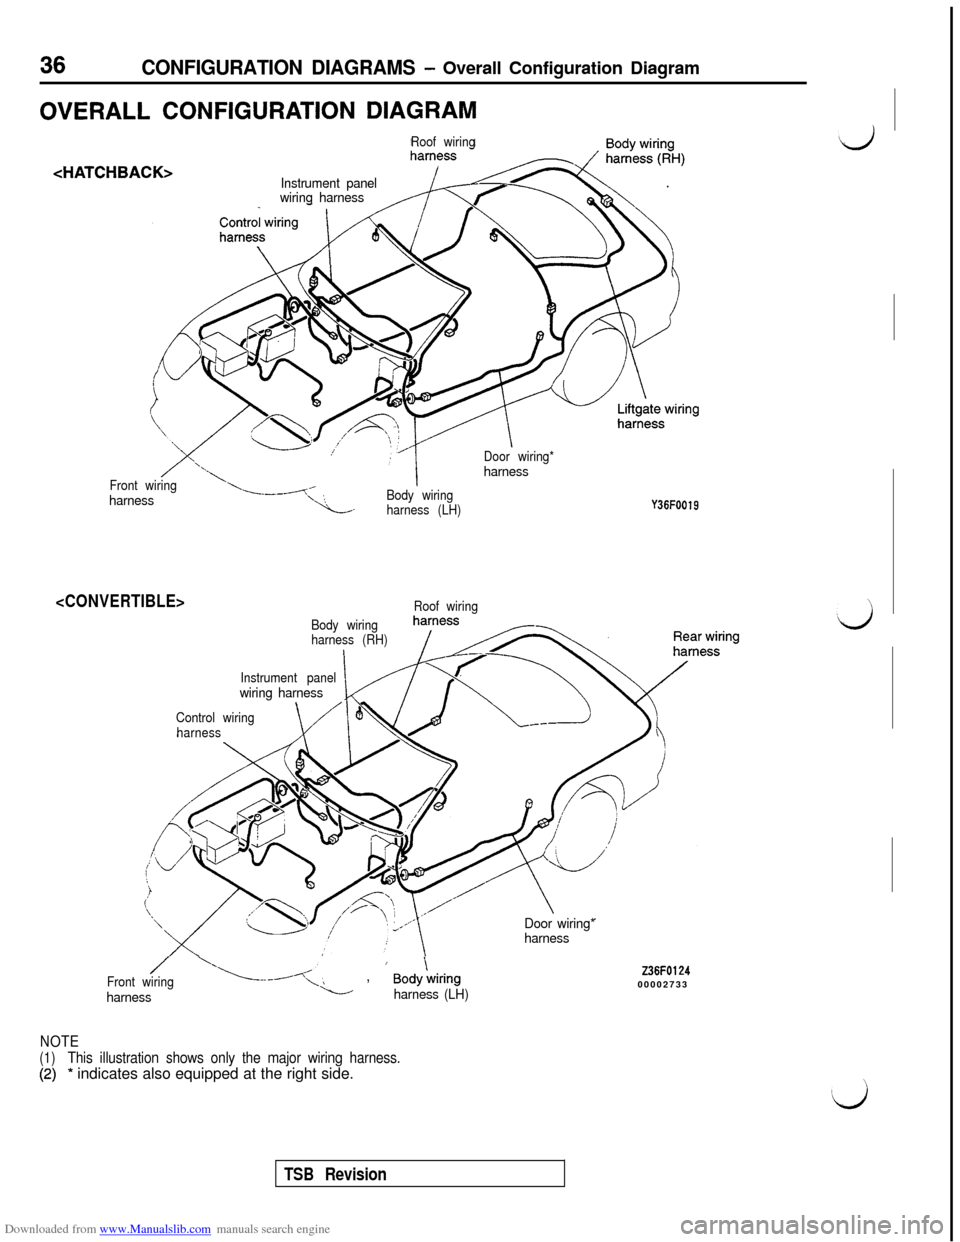 MITSUBISHI 3000GT 1995 2.G Owners Guide Downloaded from www.Manualslib.com manuals search engine 36CONFIGURATION DIAGRAMS - Overall Configuration Diagram
OVERALL CONFIGURATION DIAGRAM
<HAT1
Roof wiring
CHBACK>Instrument panel
wiring harness